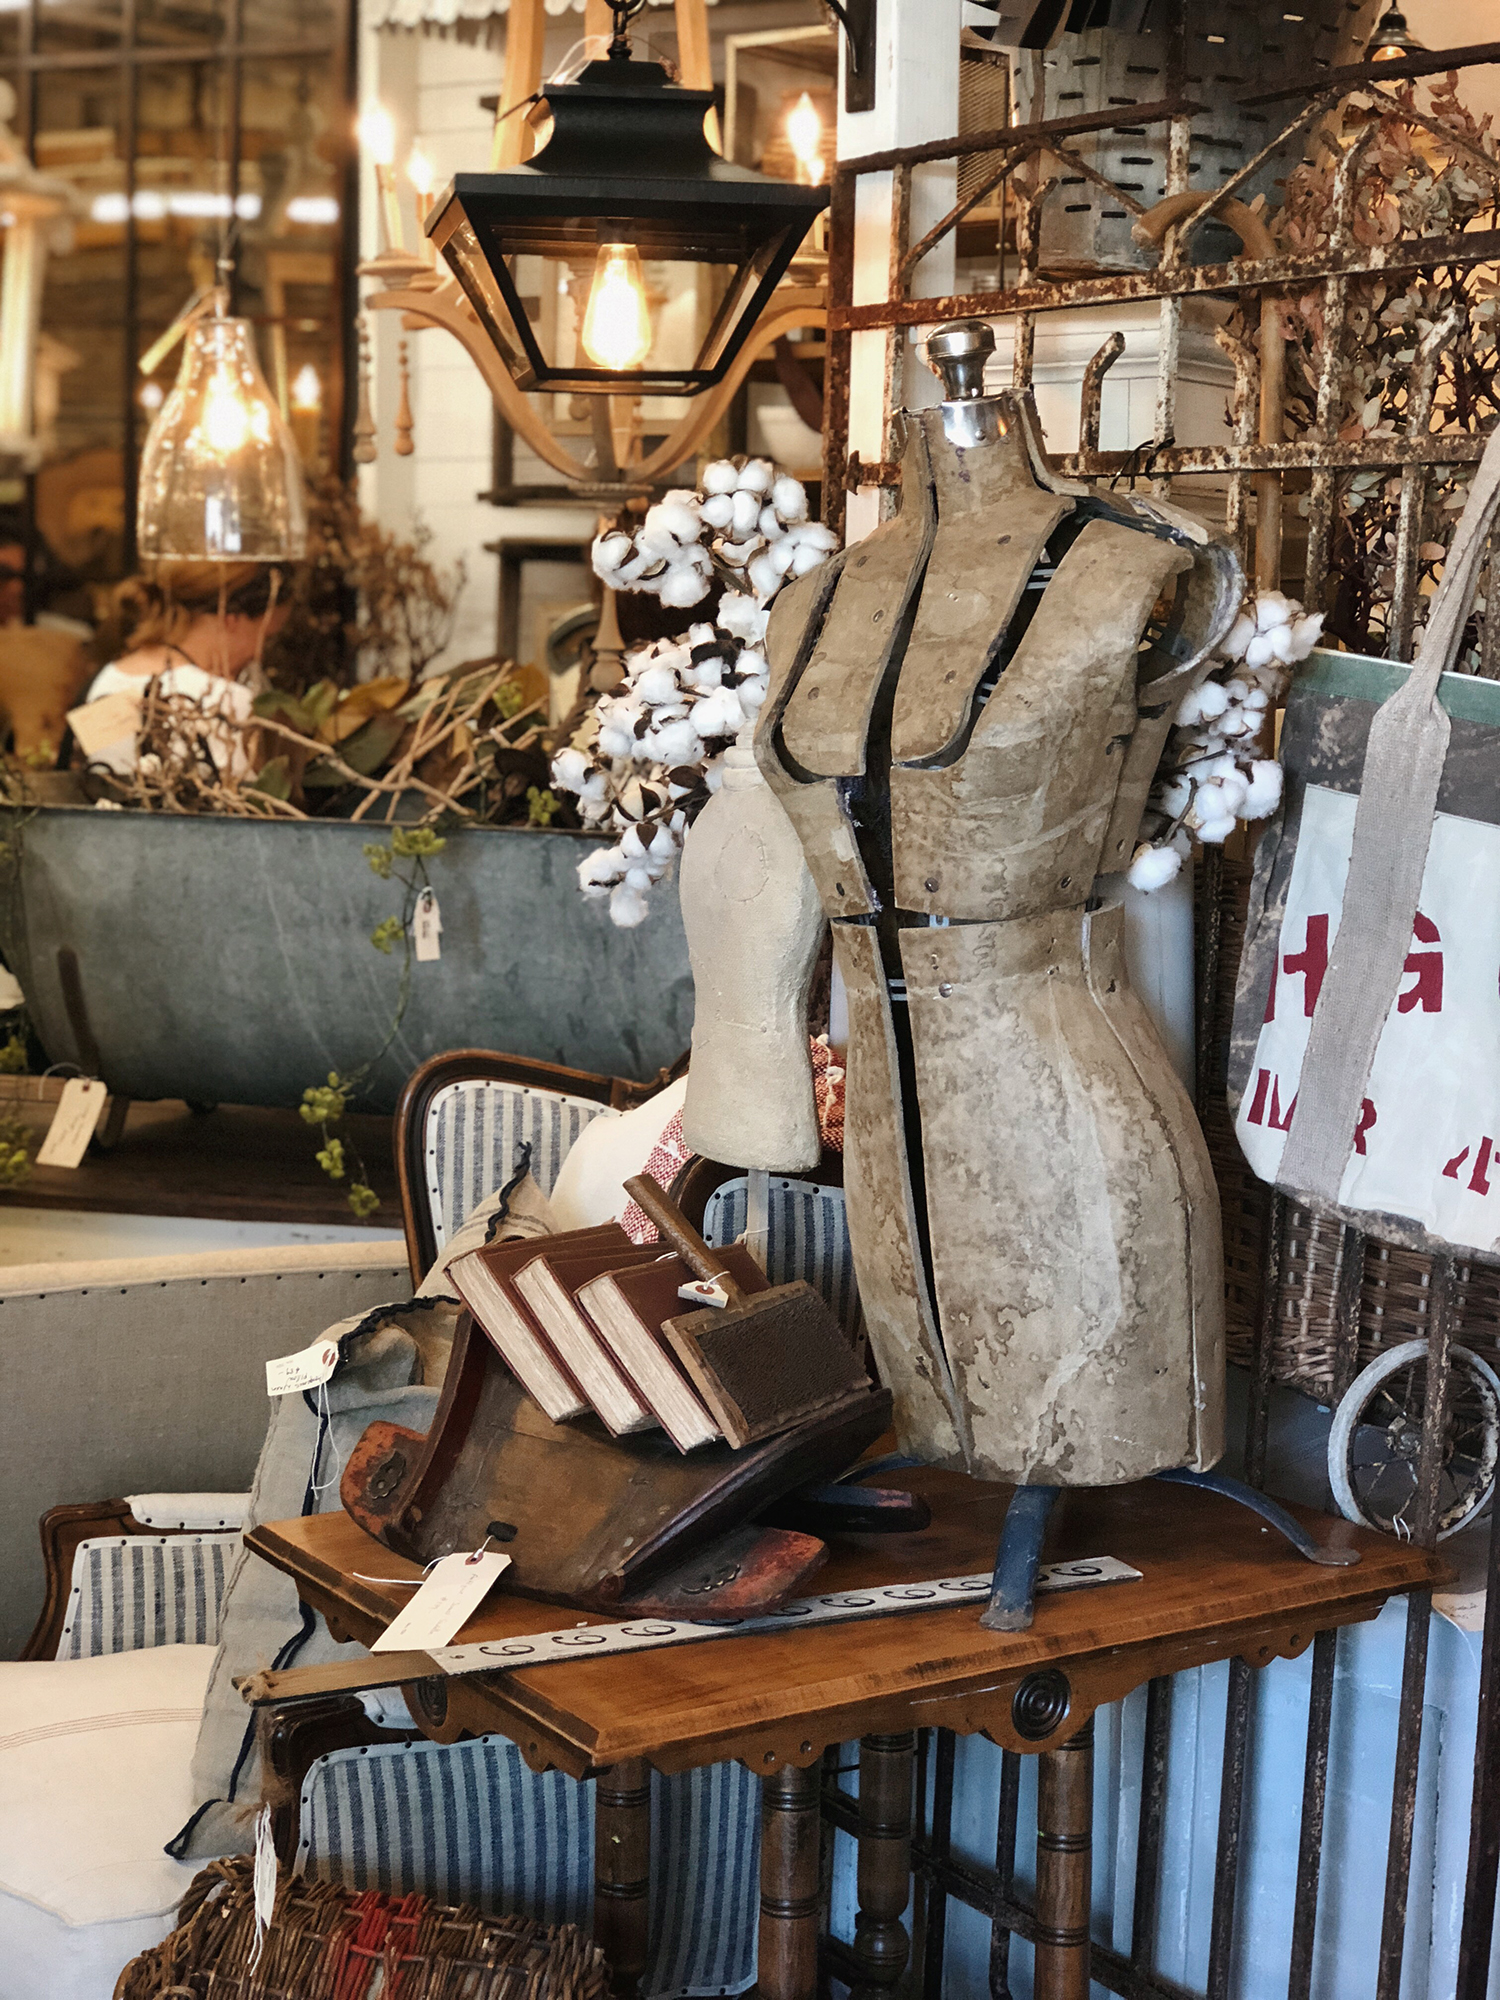 Treasure hunting at the Sweet Salvage Vintage Market in Phoenix, Arizona. Get a peek into this one-a-month market filled to the brim with beautiful finds and gorgeous designs #Phoenix #Arizona #VintageMarket #PhoenixArizonaLiving #ThingsToDoInPhoenixArizona #SweetSalvageOn7th #VintageDecor 